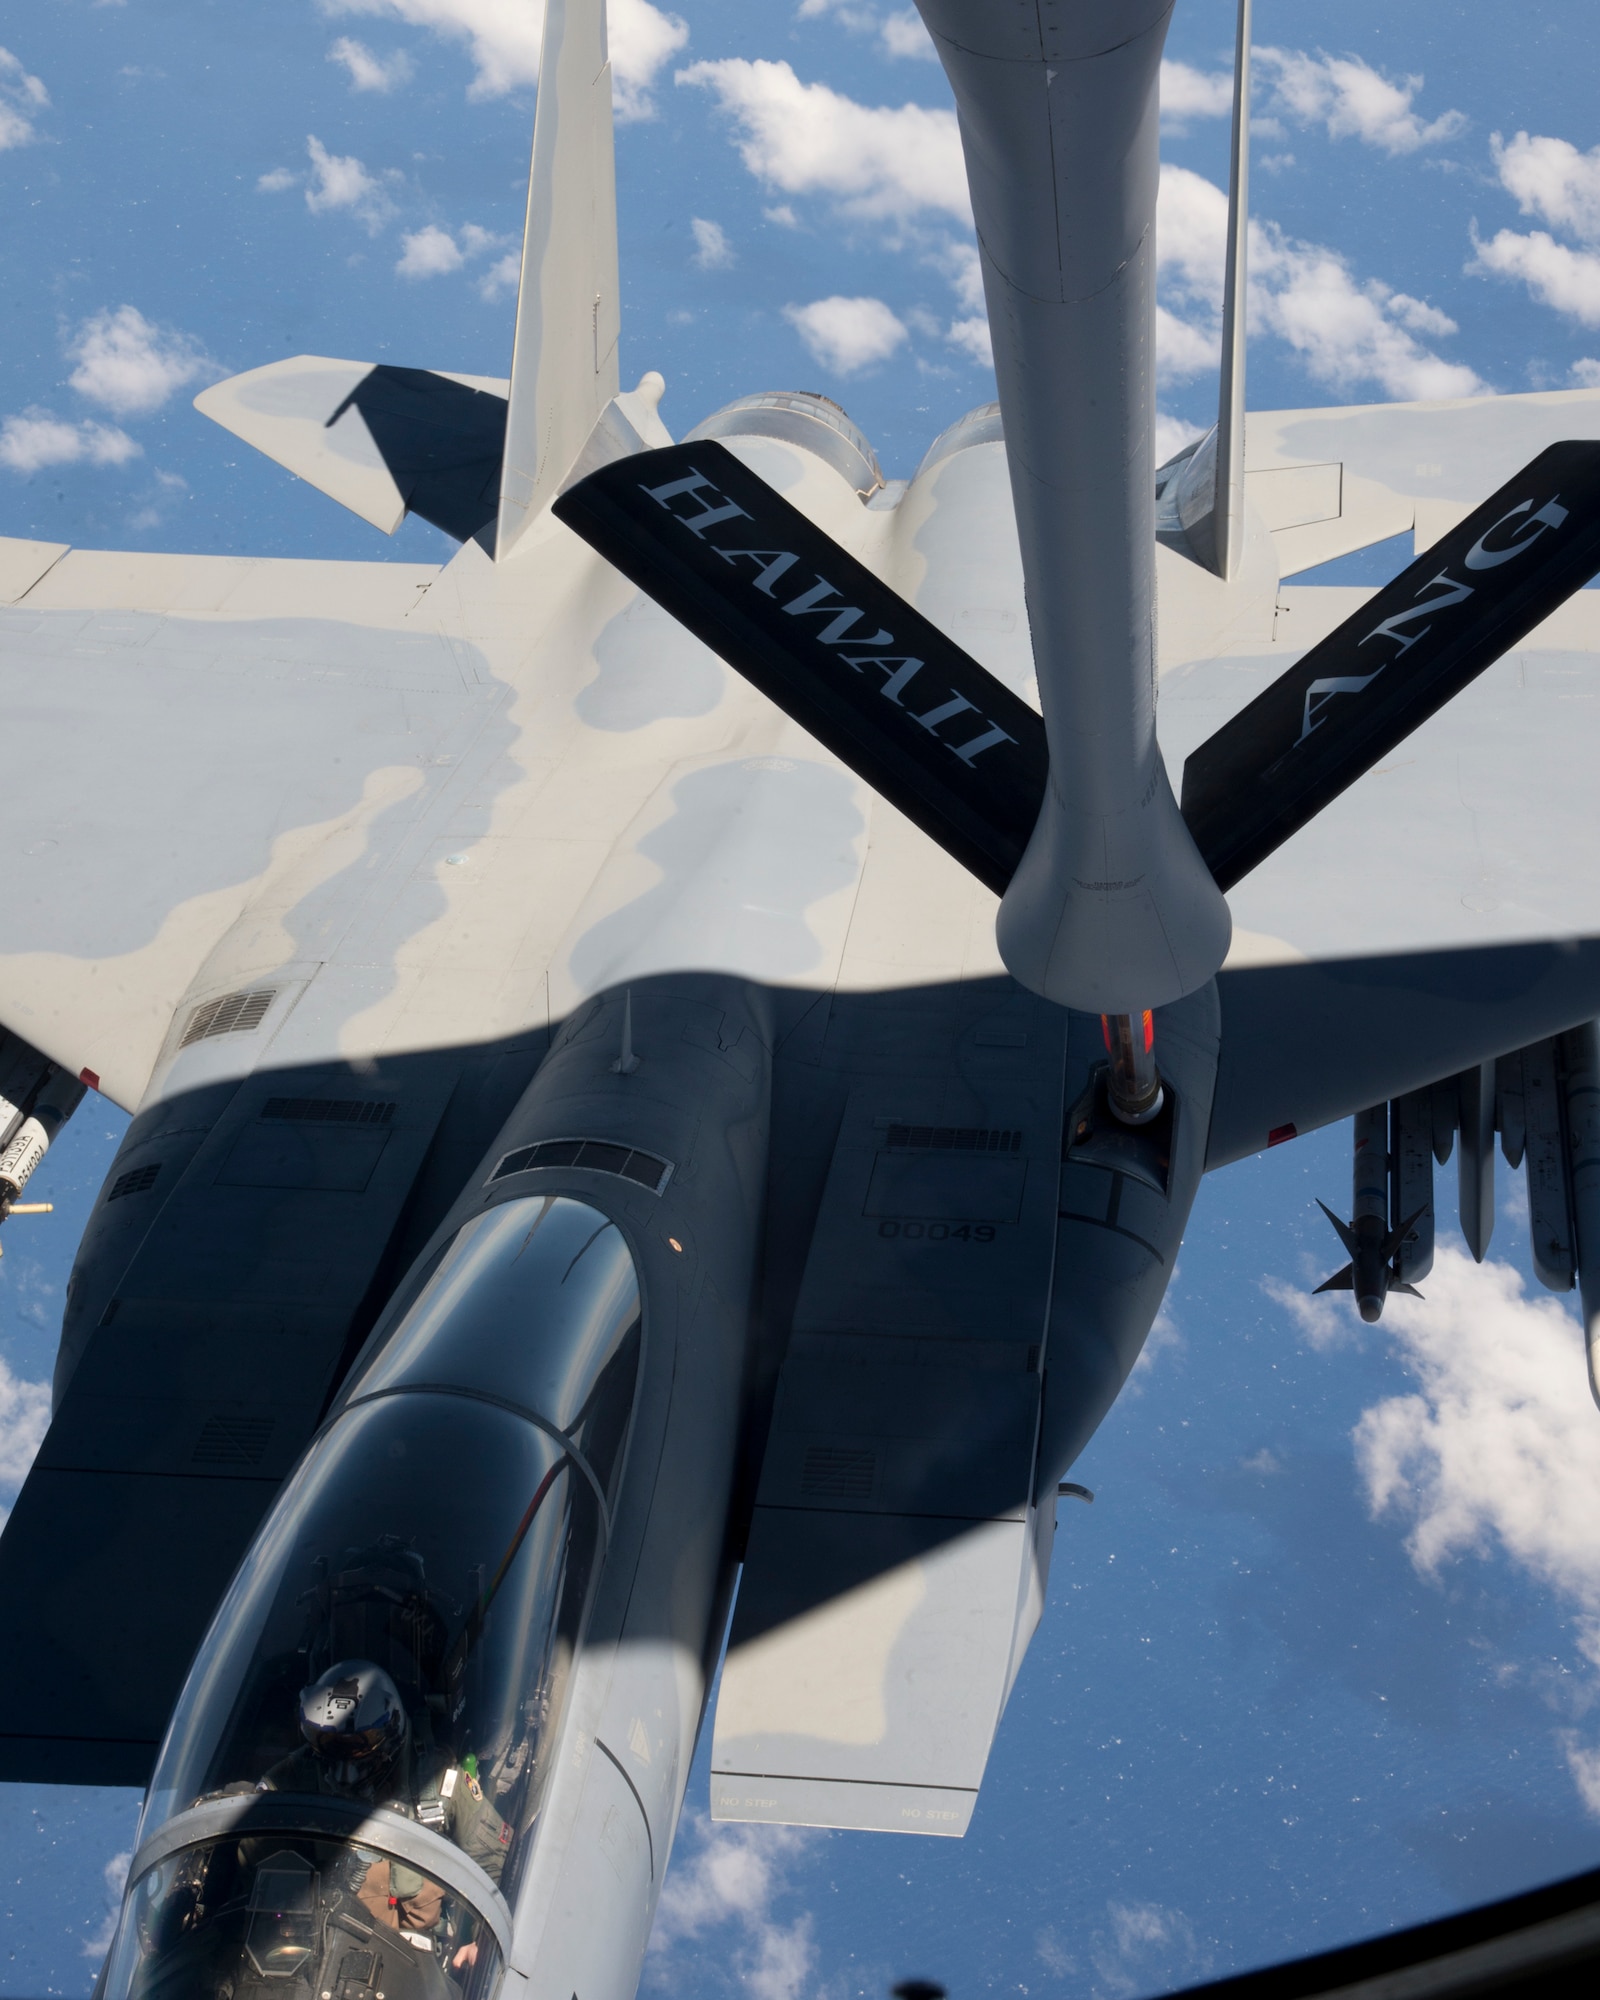 A U.S. Air Force F-15 Strike Eagle from the 142nd Fighter Wing, Oregon Air National Guard, refuels from a KC-135R Stratotanker from the 96th Air Refueling Squadron, during the Hawaii Air National Guard exercise Sentry Aloha over Hawaii, March. 5, 2015. This is second large-scale Sentry Aloha fighter exercise in 2015 hosting 45 aircraft and more than 1,000 servicemen from seven states. (U.S. Air Force photo by Tech. Sgt. Aaron Oelrich/Released)